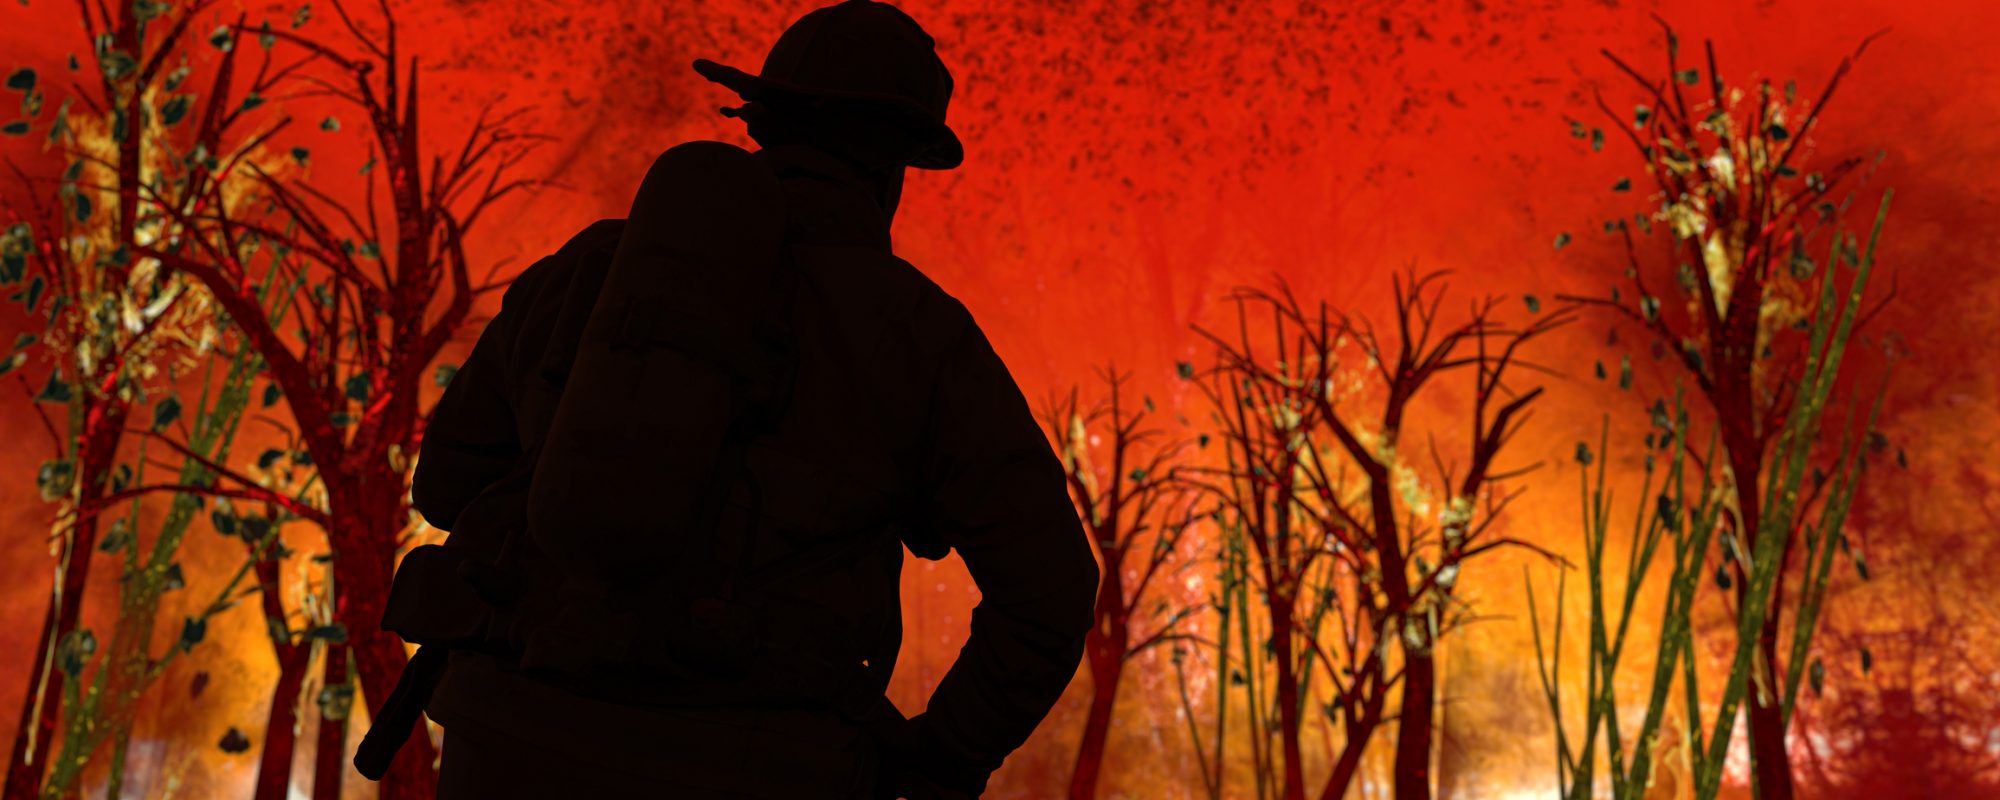 Fireman is abut to fight with flames in forest in Australia ready for action 3d rendering